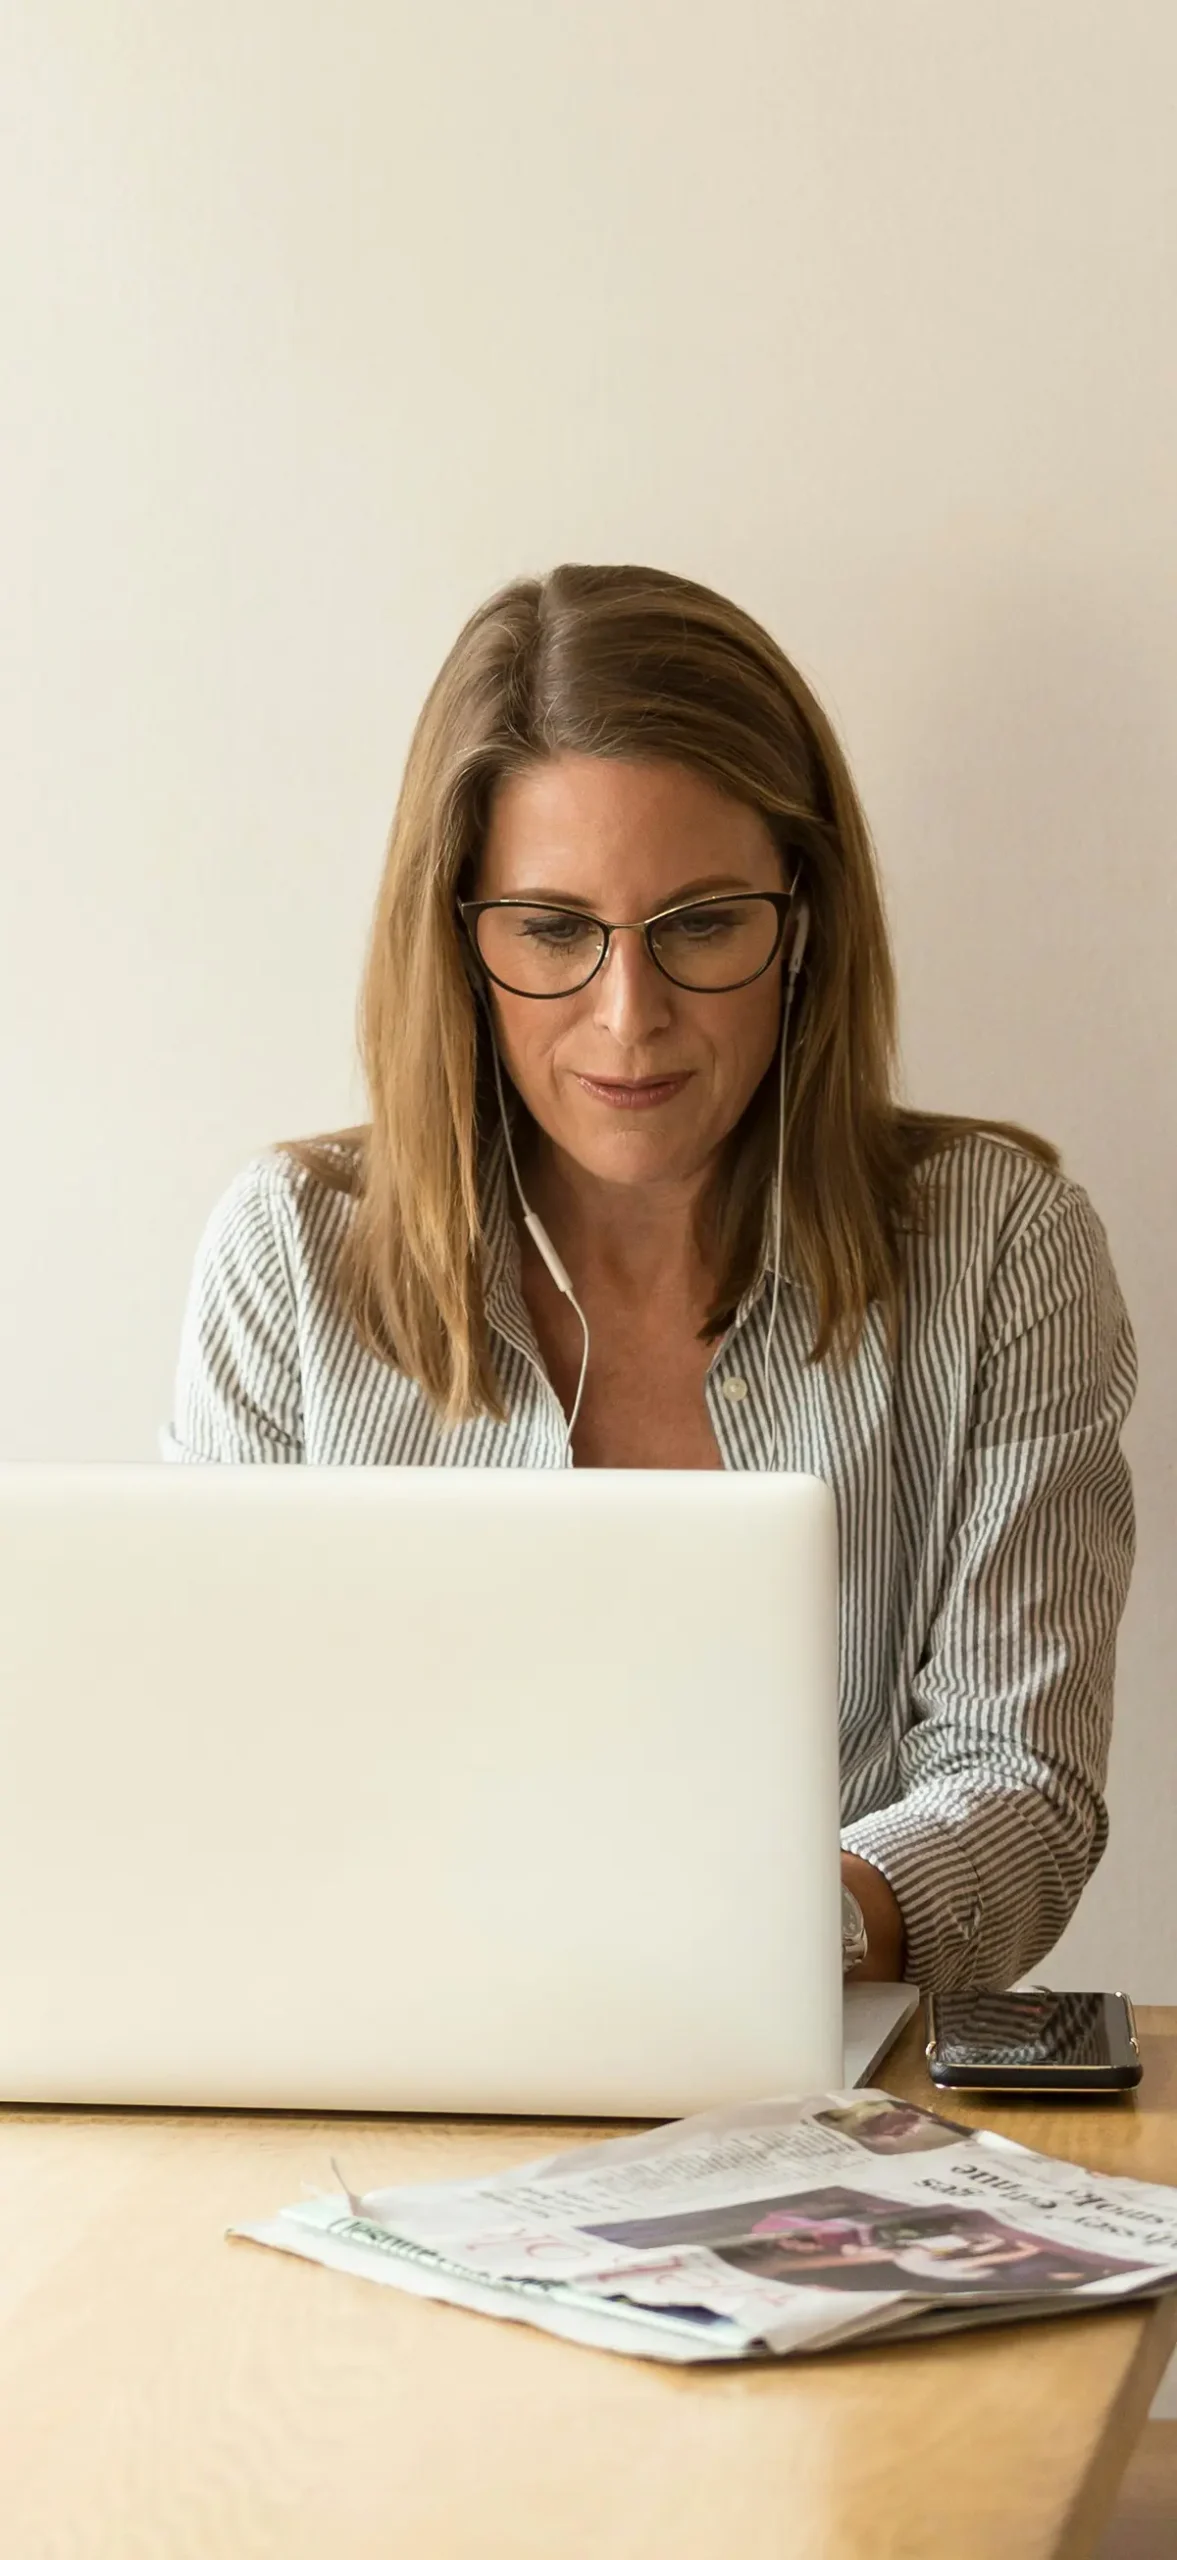 Portrait close-up photograph view of a woman listening to her wired earbuds and glancing at a laptop screen while seated down at a wooden table with a smartphone and newspaper situated nearby the laptop